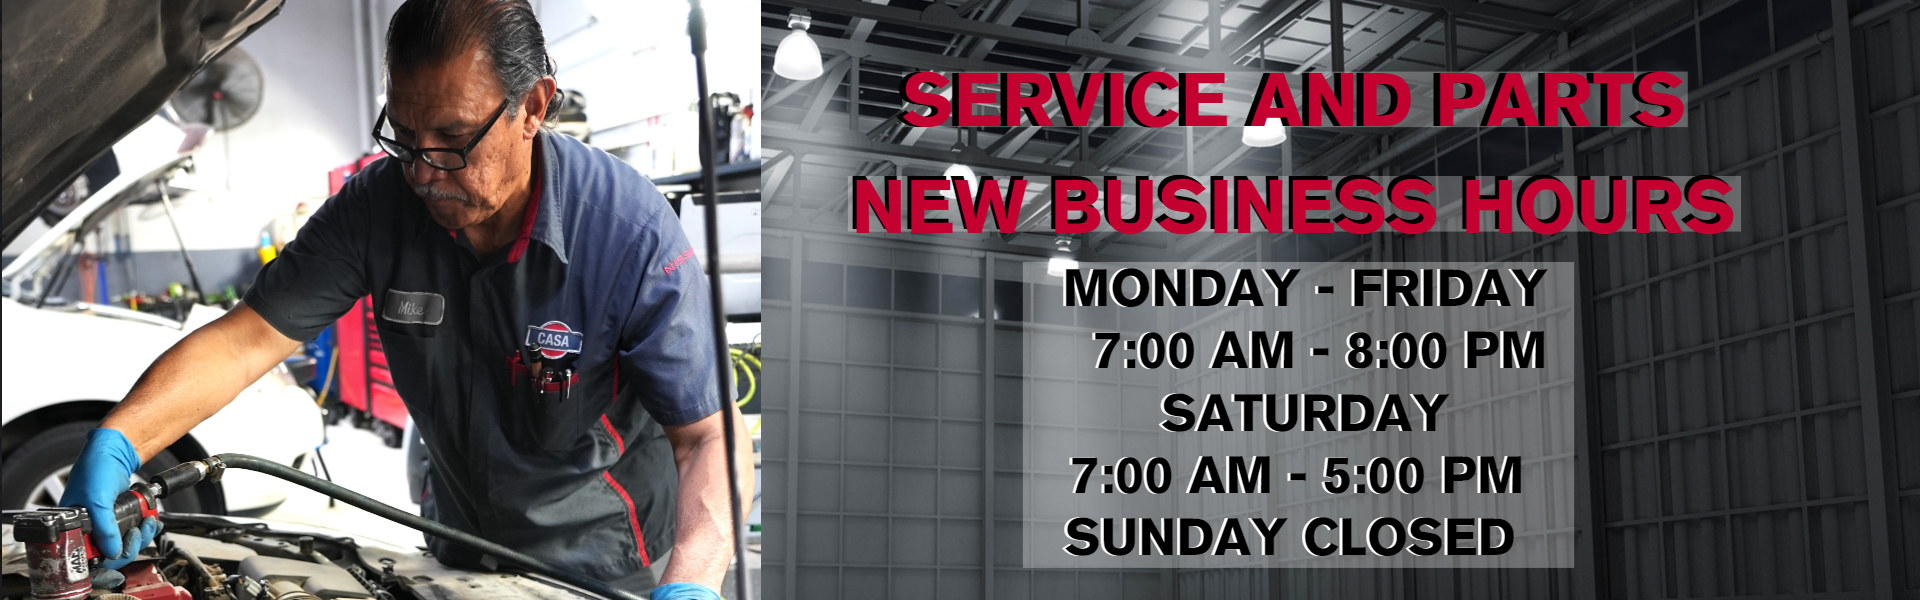 SERVICE AND PARTS NEW HOURS 